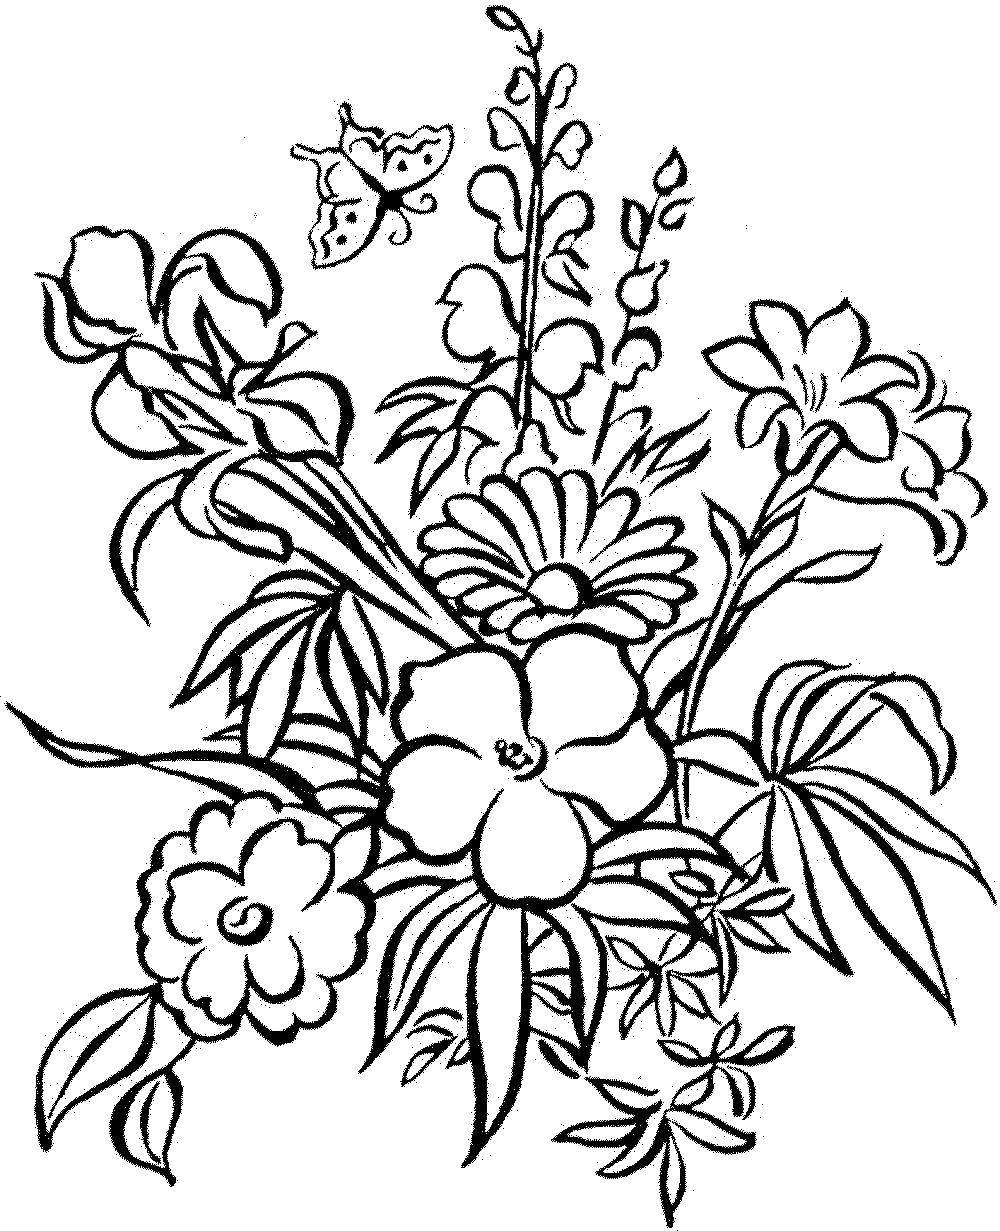 Coloring Flowers. Category For girls. Tags:  flowers, plants, buds, petals.